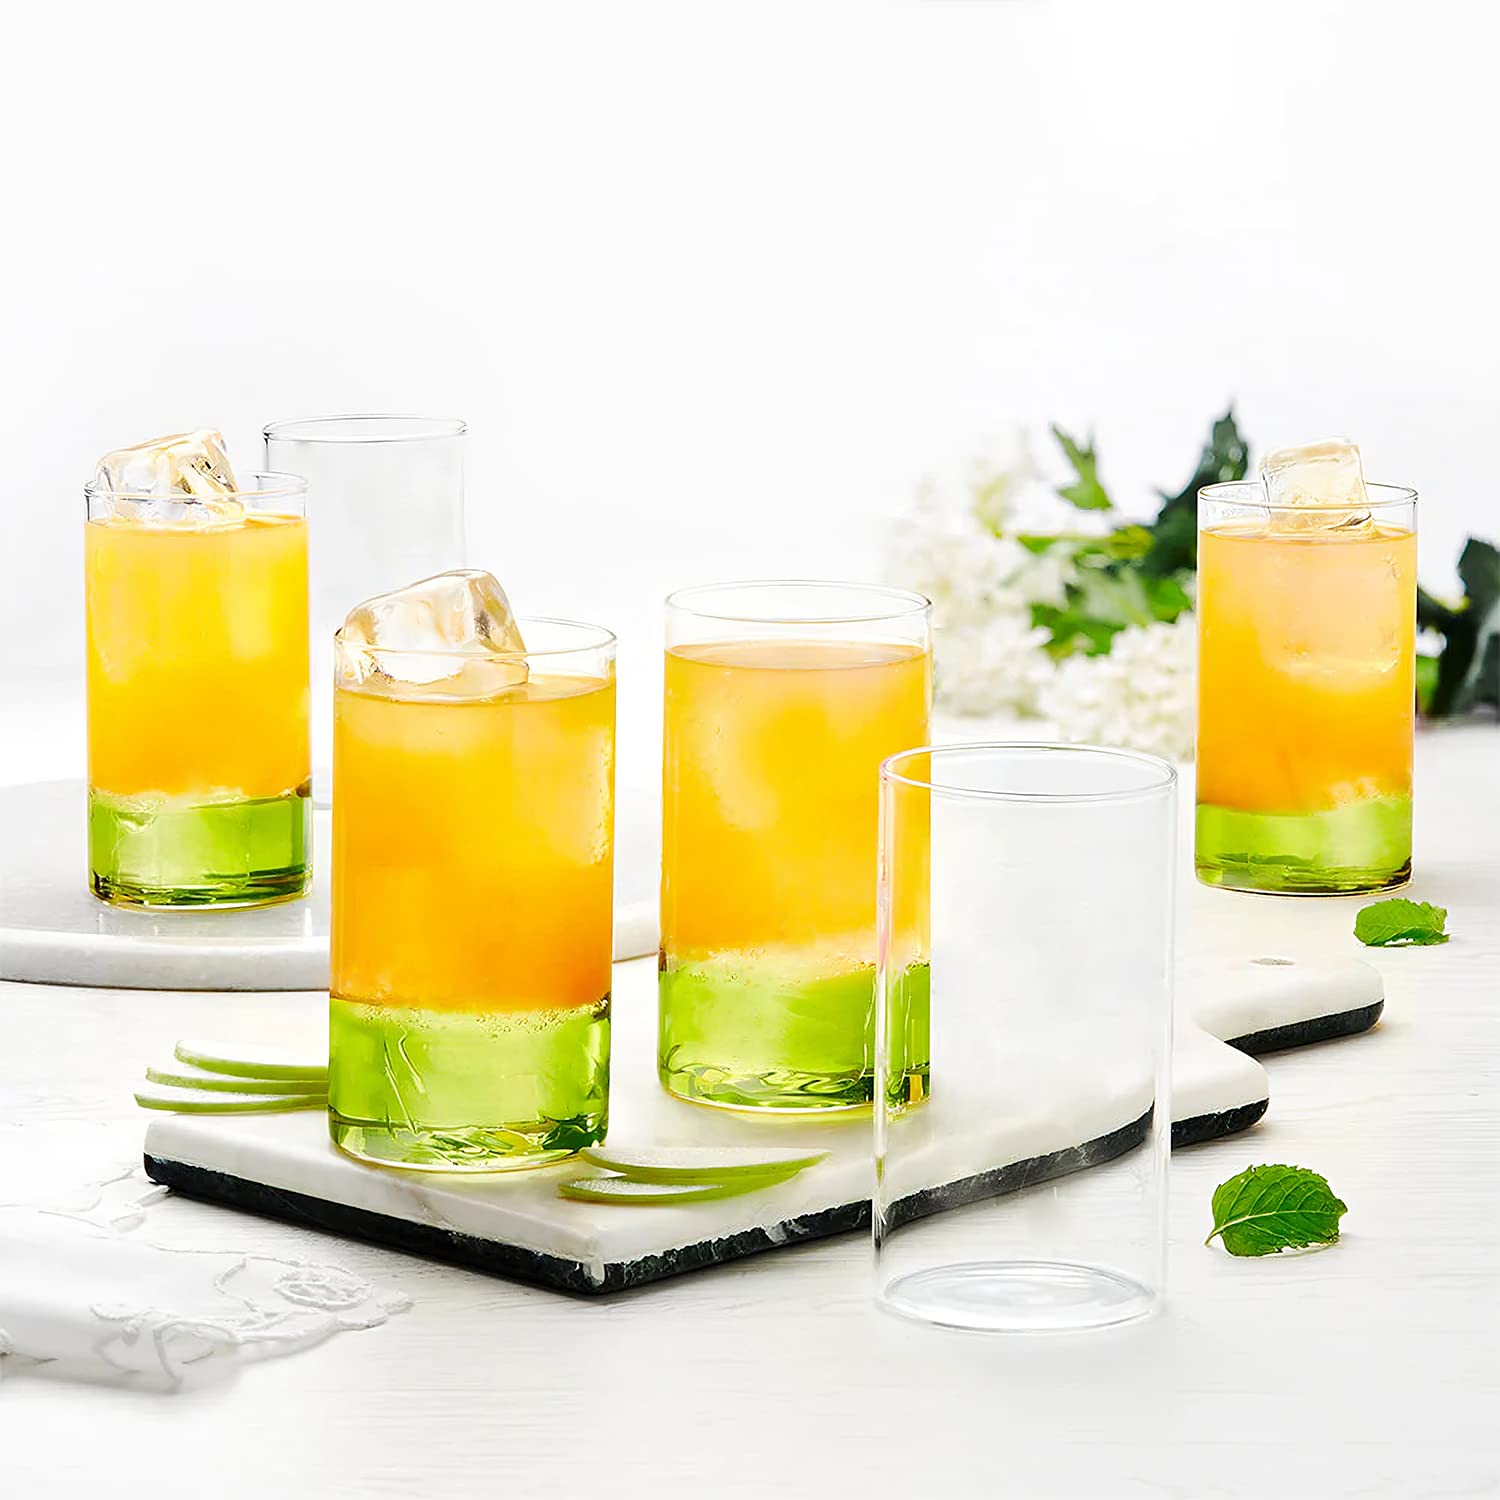 Borosil Vision Glass, Feather Light (Transparent, 350 ml) -Set of 6, Oven, Micro, Freezer Safe - Premium glass tumblers from Borosil - Just Rs. 550! Shop now at Surana Sons